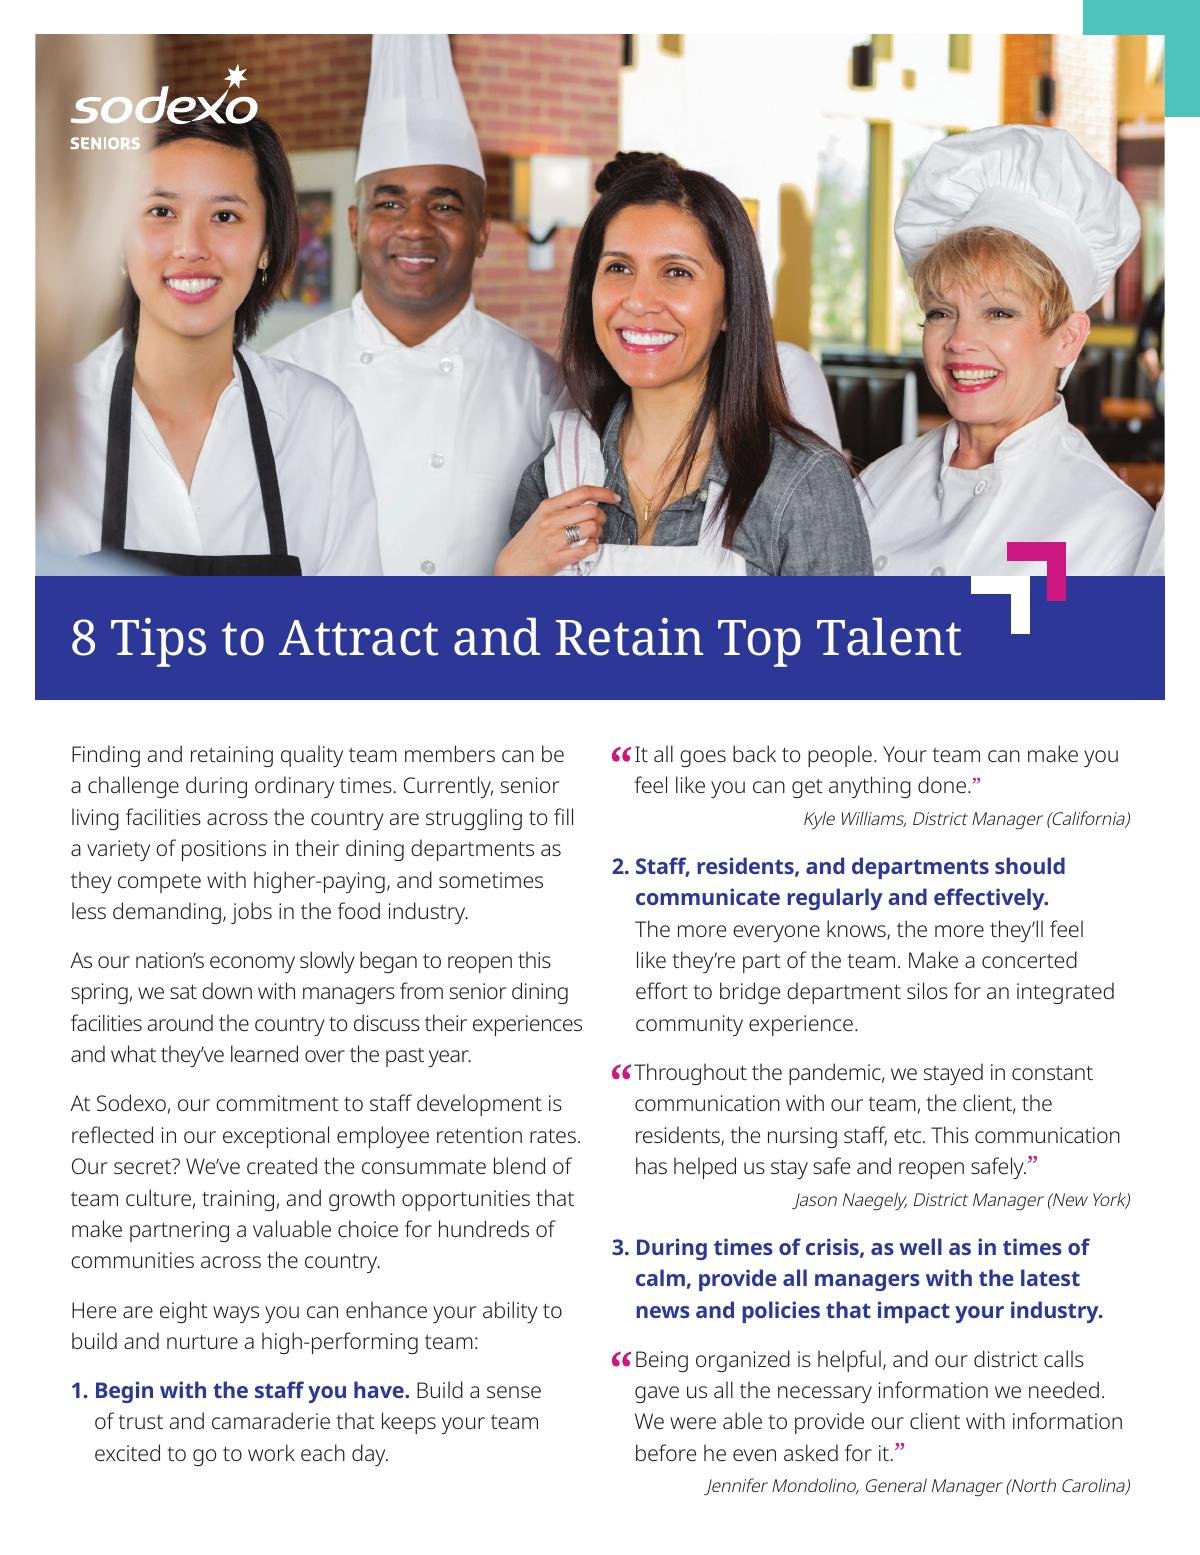 8 Tips to Attract and Retain Top Talent